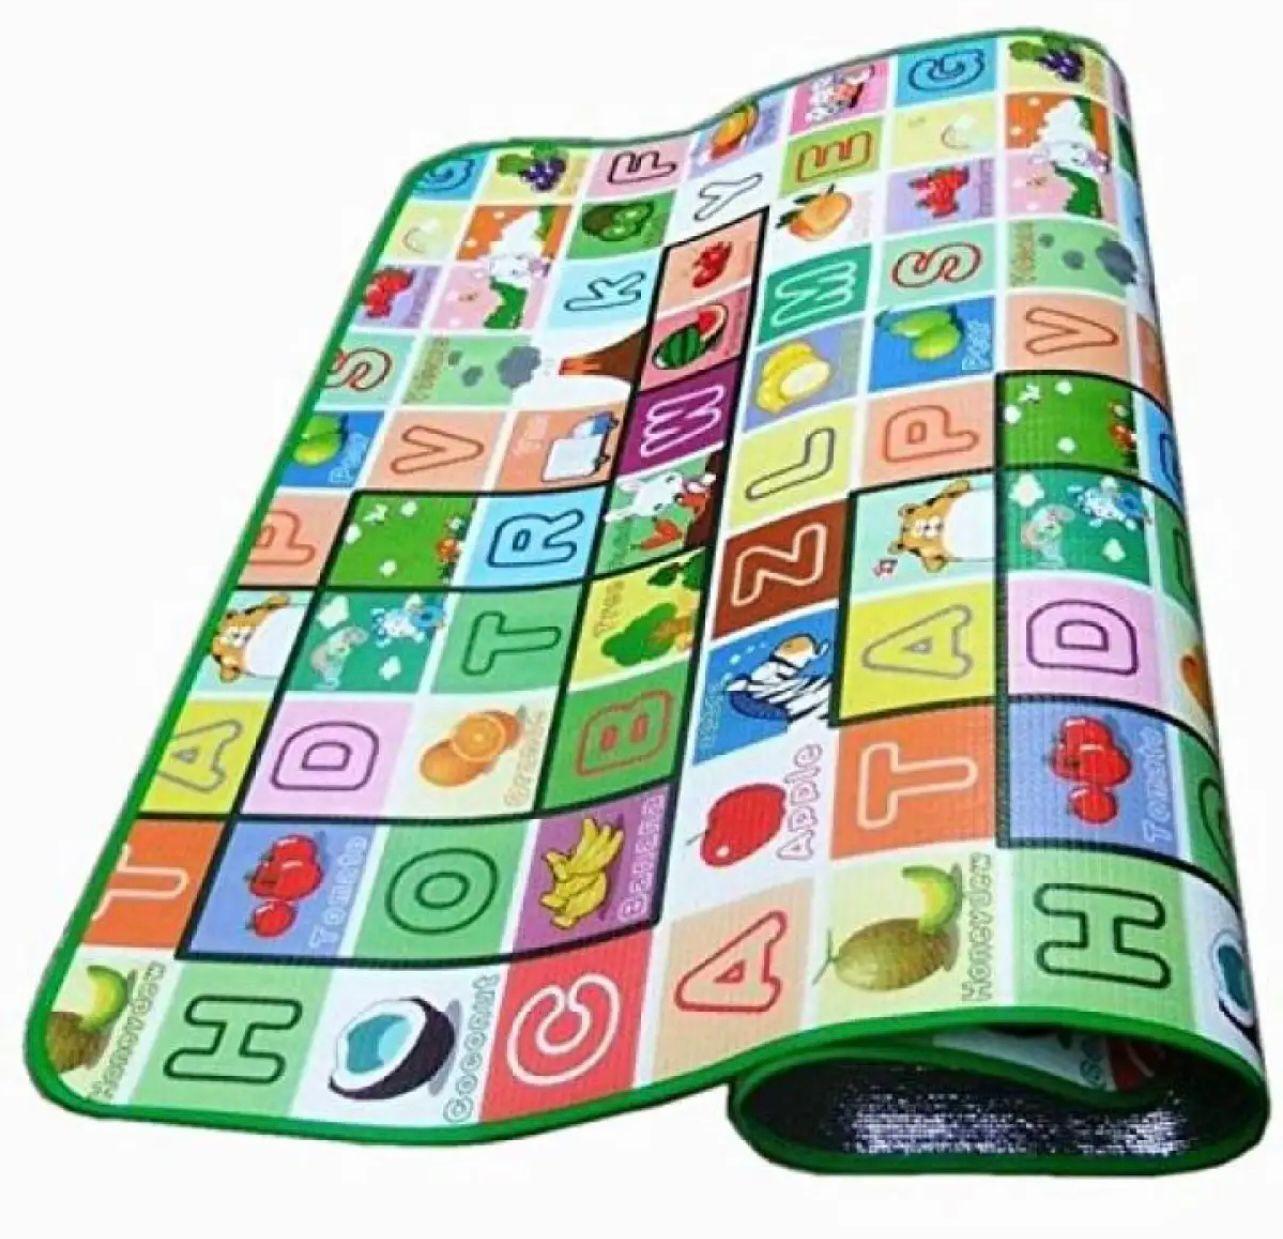 Crawling Play Mat For Kids - Multi-Color